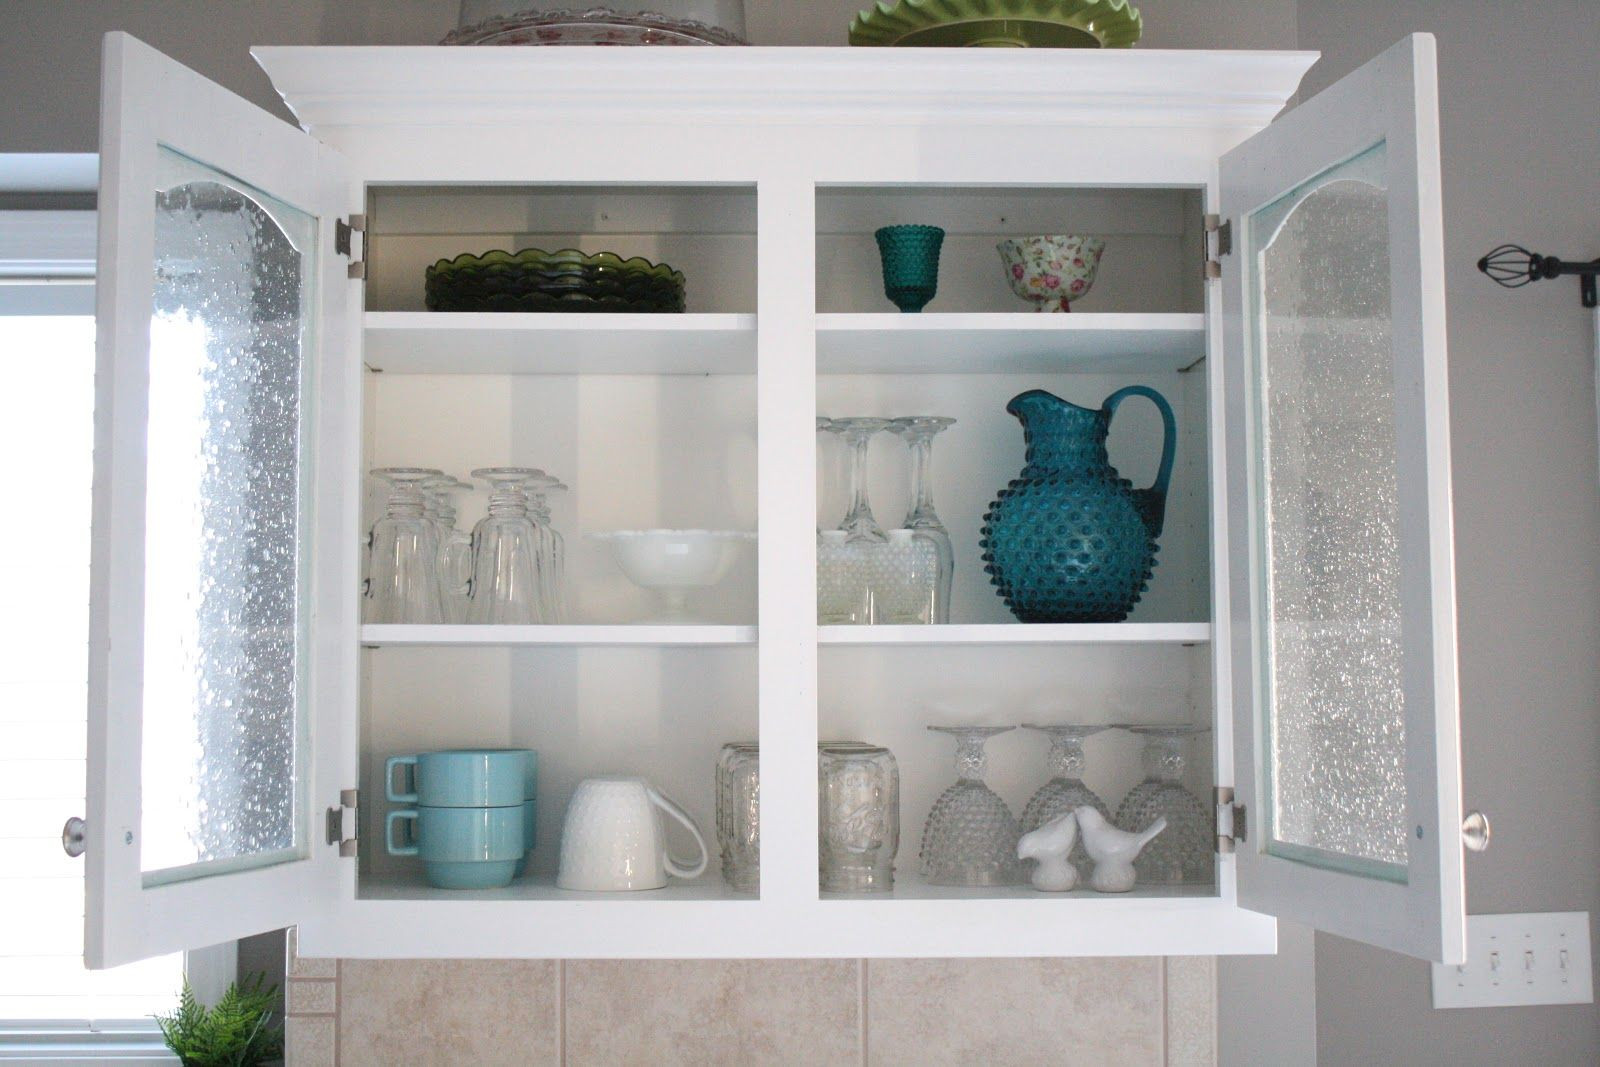 Glass Fronted Kitchen Wall Cabinet
 Classic Kitchen Cabinets Doors Glass Upside Down Cups And